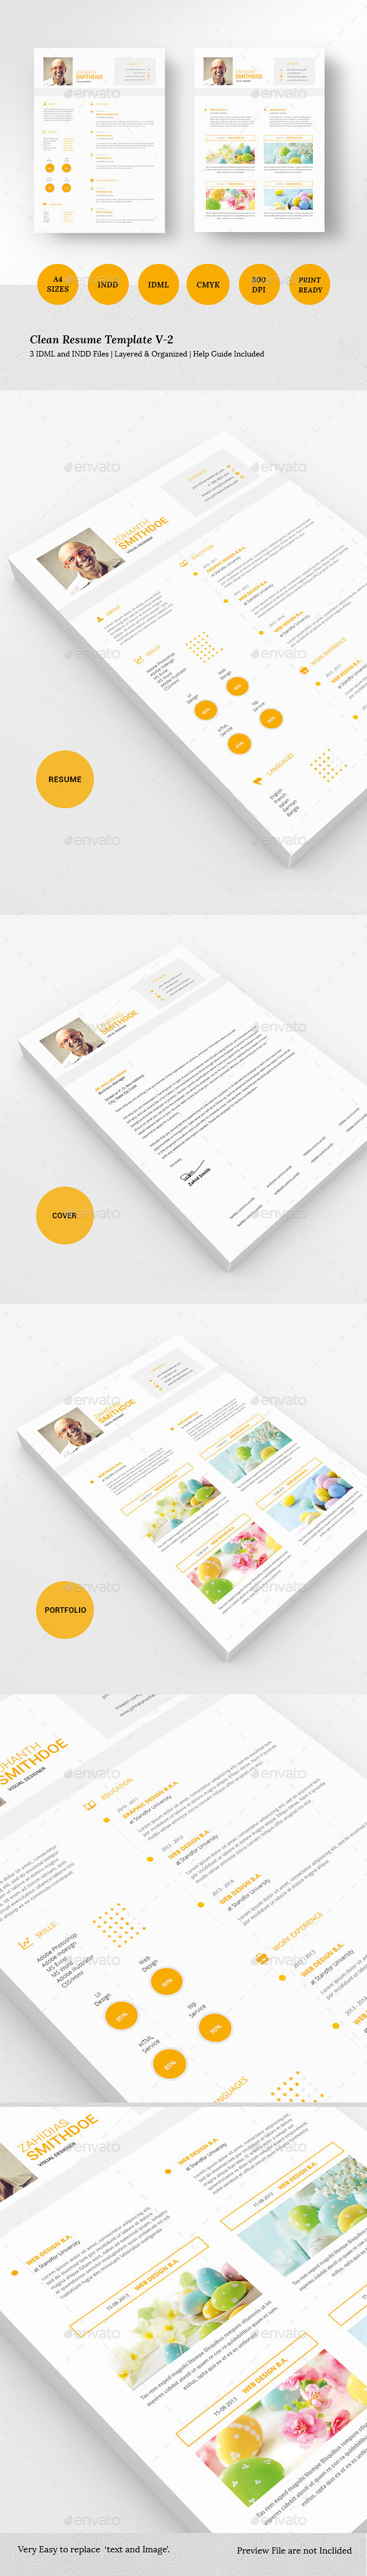 Clean 20resume 20template 20v 2 20preview.